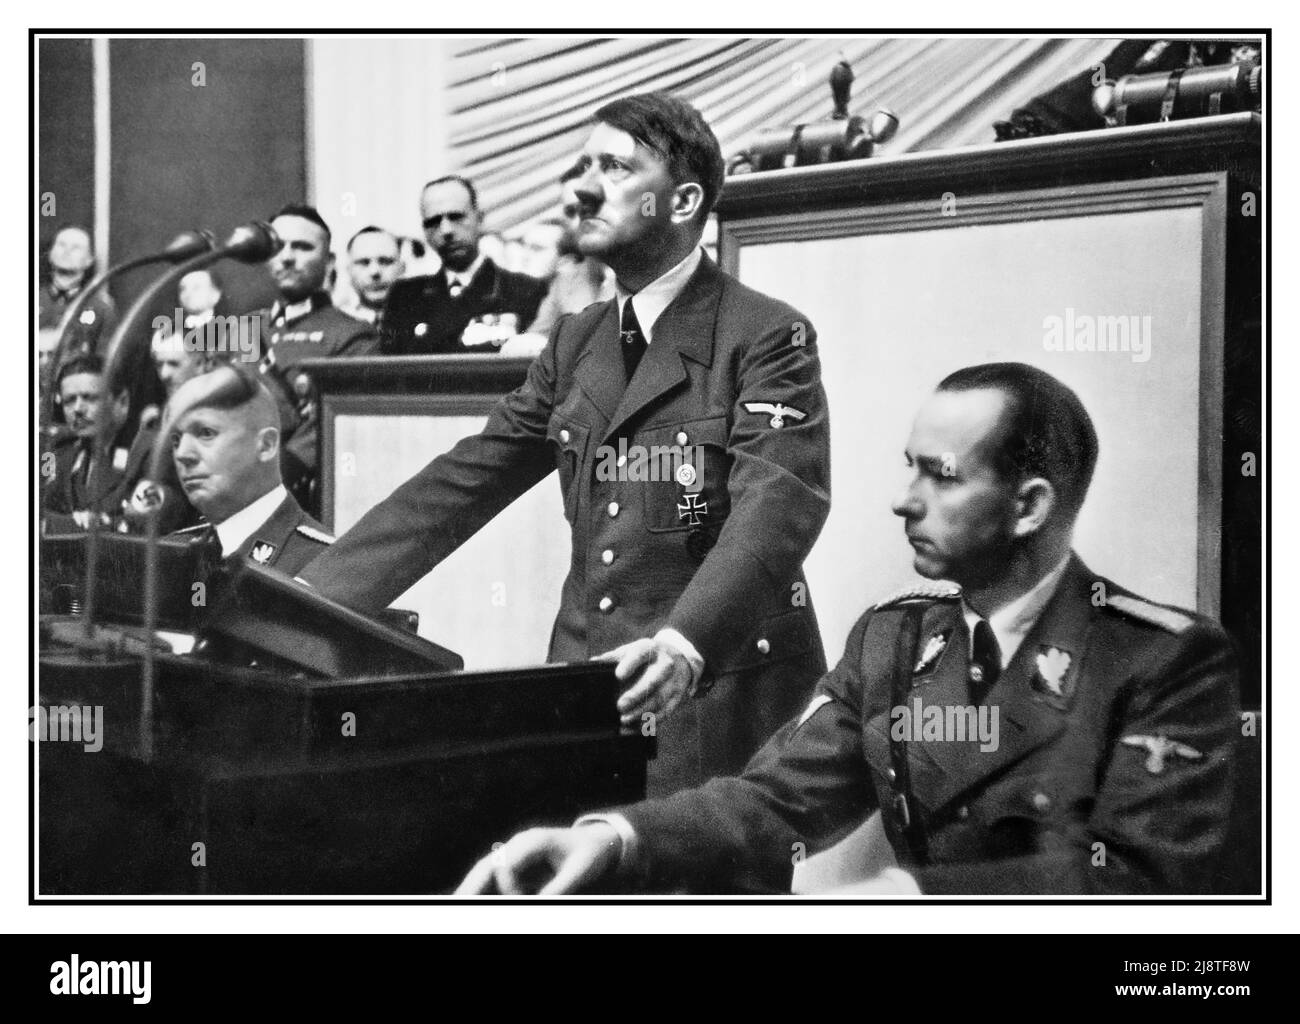 Adolf Hitler making his 1939 war speech to The Reichstag Berlin Nazi Germany De grosse Reichstag. 1939. Translation: The great Reichstag. 1939.  Address by Adolf Hitler, Chancellor of the Reich, before the Reichstag, September 1, 1939.  Hitler at the Reichstag, 1 September 1939. For this speech, Hitler wore a field-grey military uniform, conforming with the Generalissimo rank he was assuming, rather than the brown Nazi Party uniform that he had worn for earlier speeches. 1 September 1939, the day of the German invasion of Poland. The speech served as public declaration of war against Poland Stock Photo